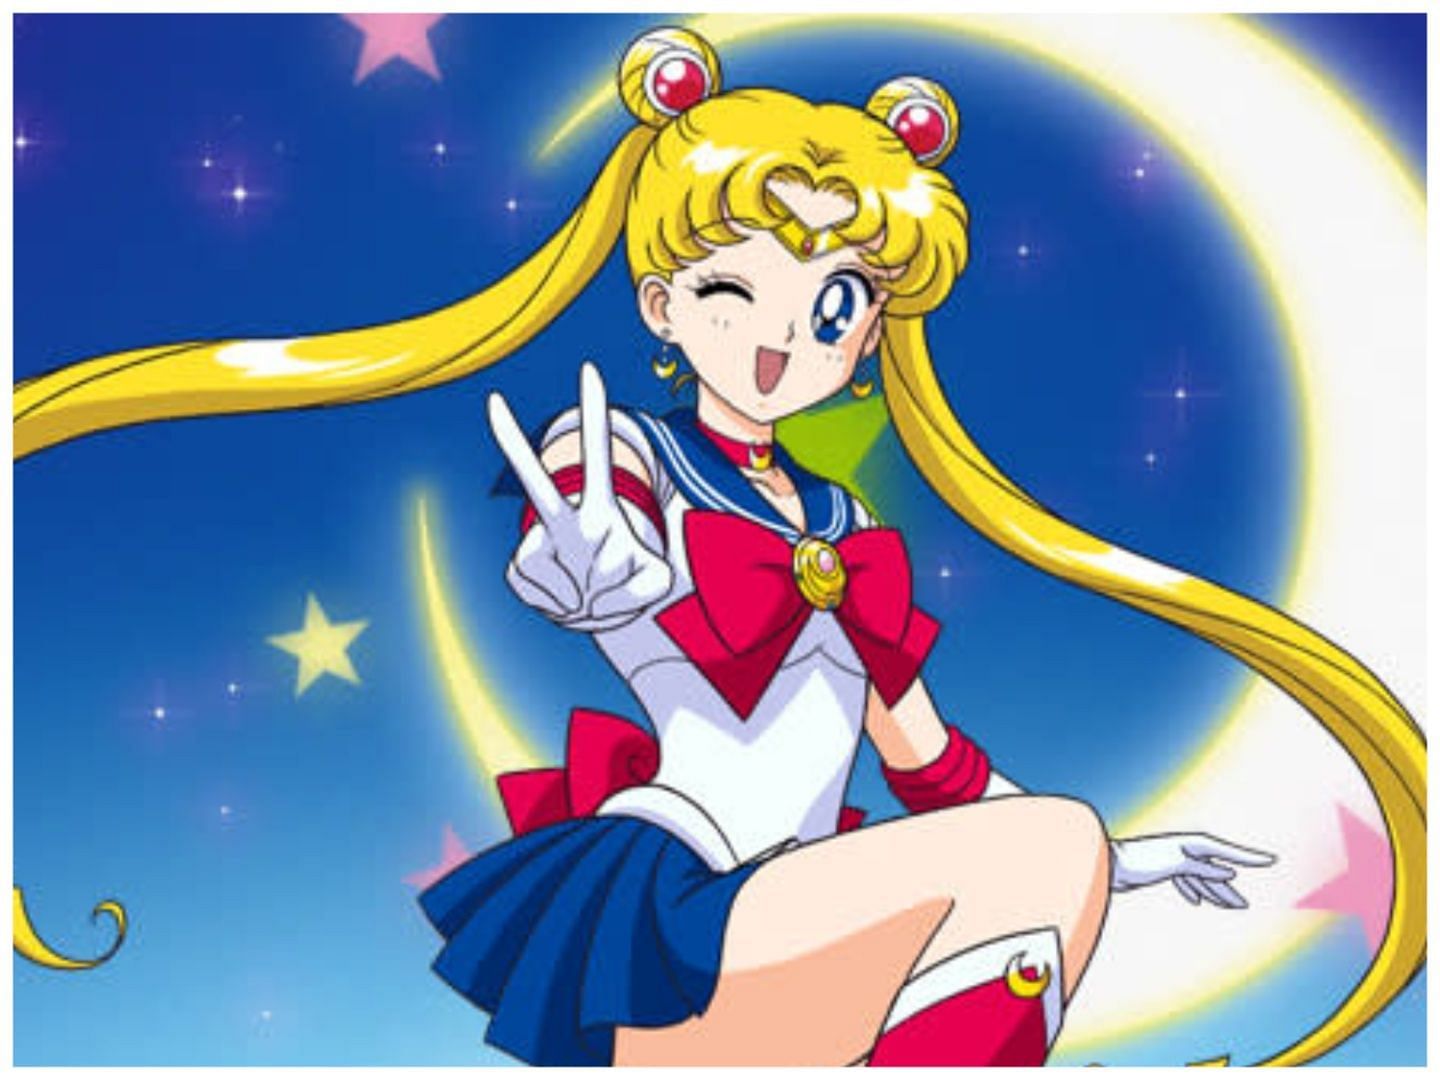 When it was first released in Japan, Sailor Moon was called Pretty Soldier Sailor Moon and later became Pretty Guardian Sailor Moon. (Image via Toei Animation)